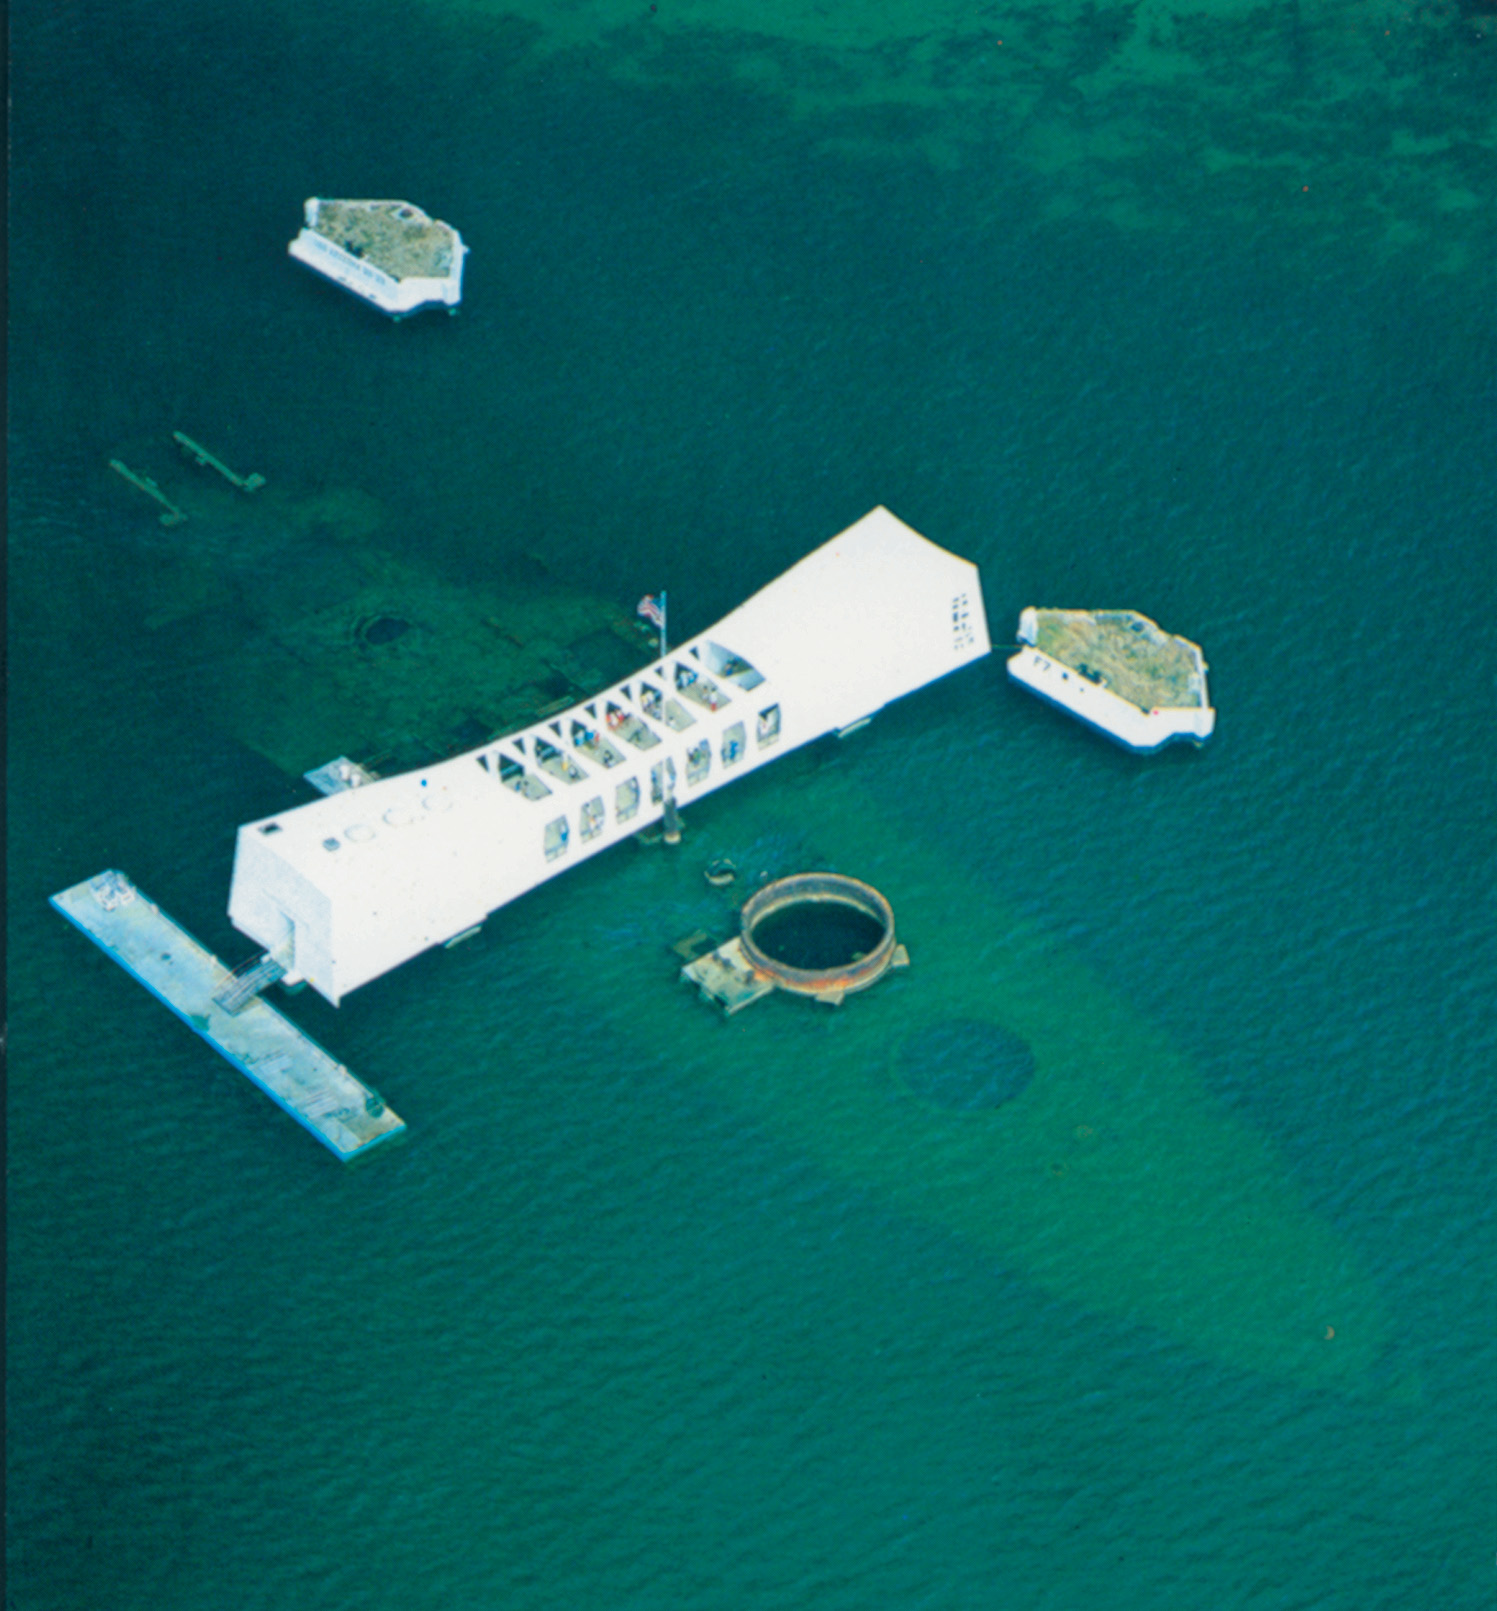 The Arizona Memorial sits astride the sunken vessel where hundreds of her crew are entombed.